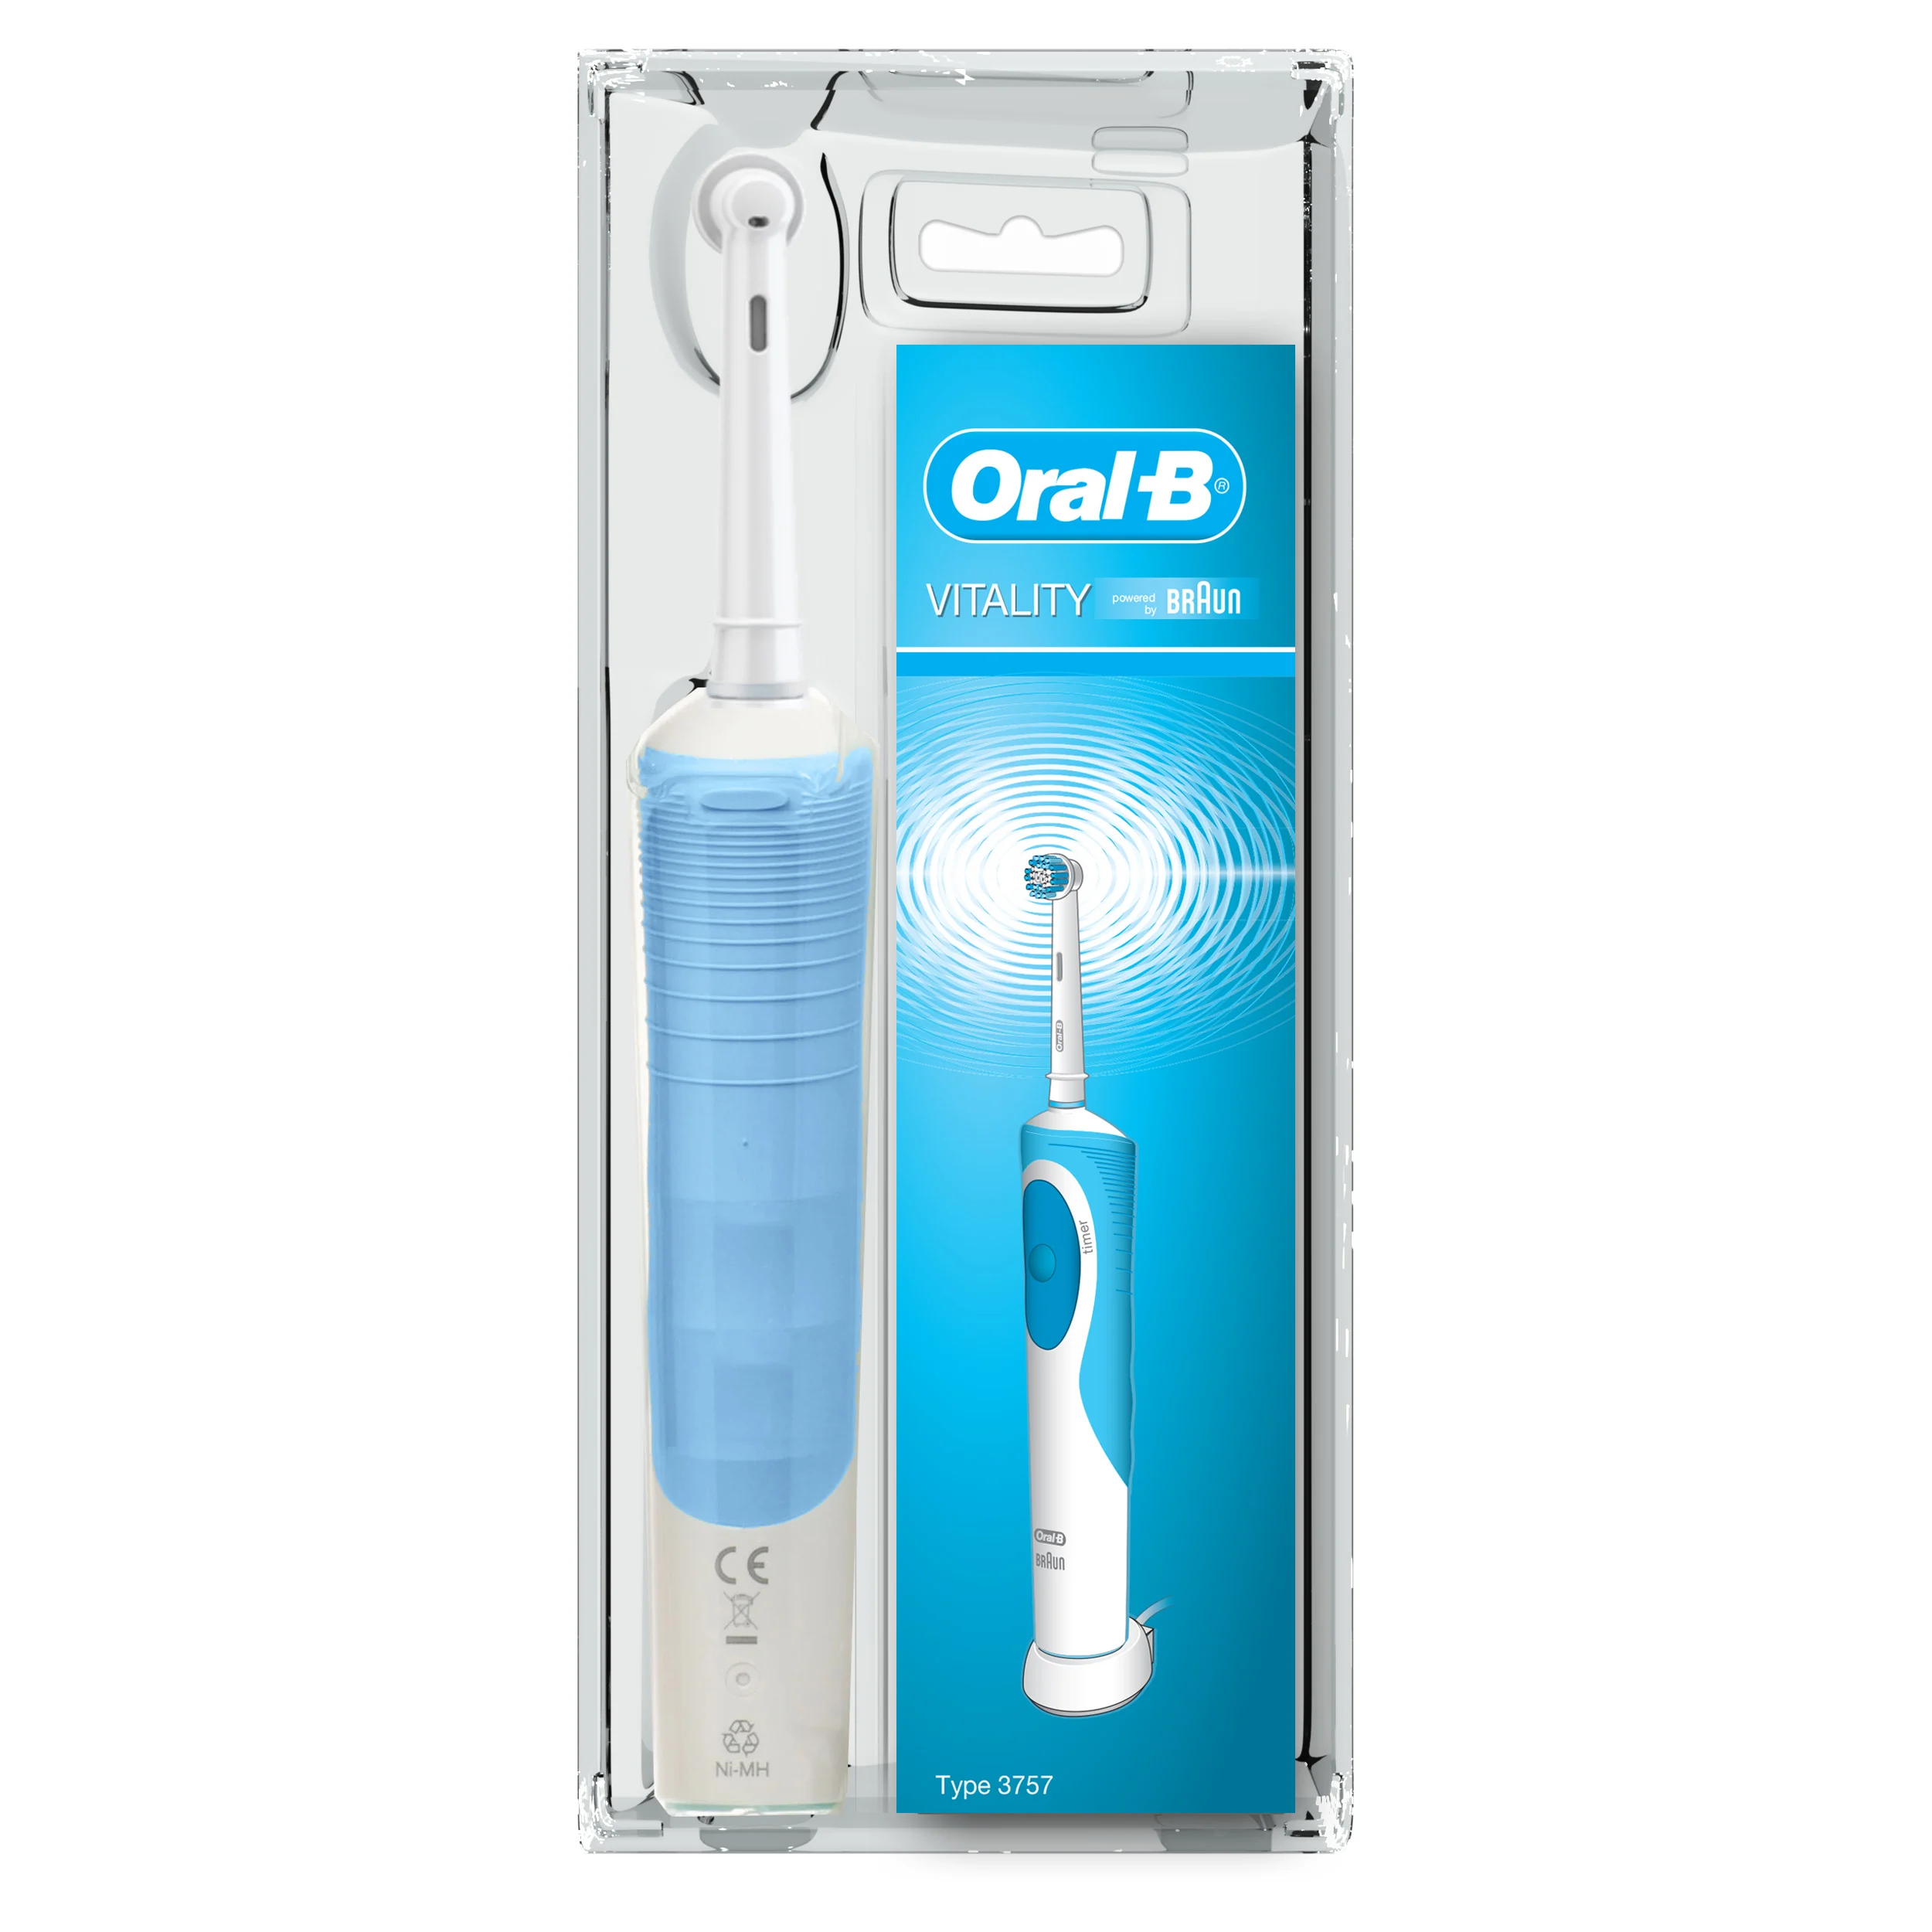 Størrelse Alice fusion Oral-B Vitality Electric Toothbrush Precision Clean